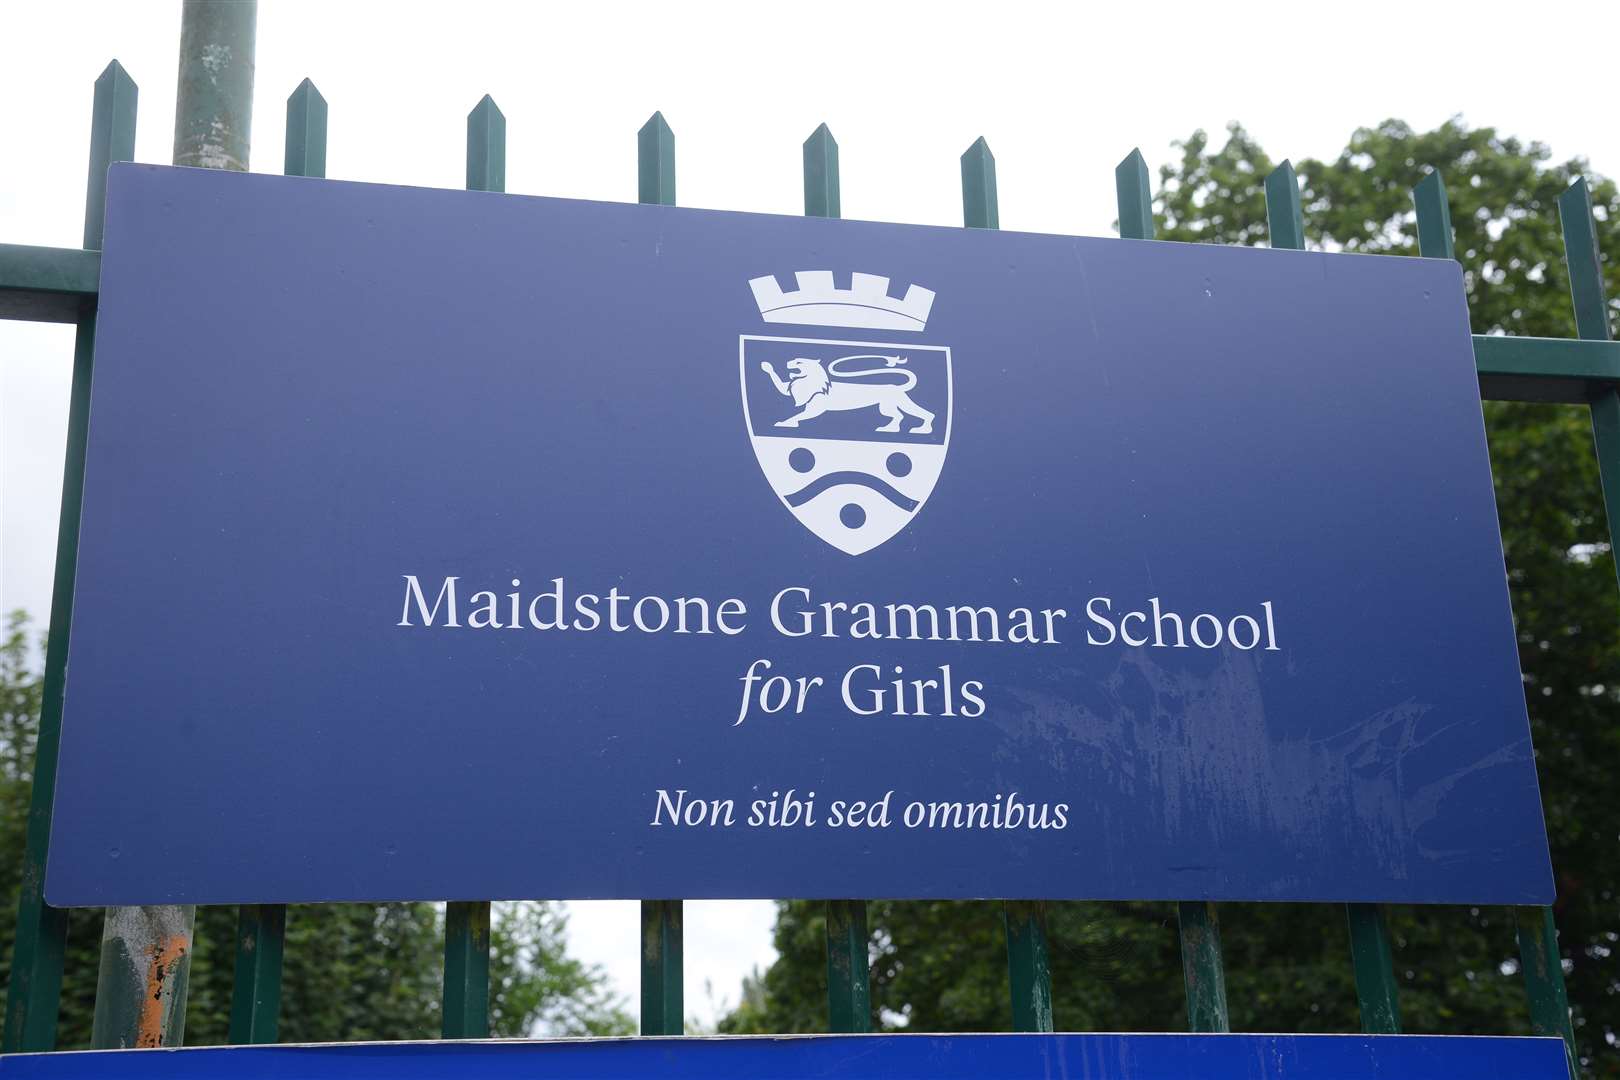 Pupils at Maidstone Grammar School for Girls have been left disappointed